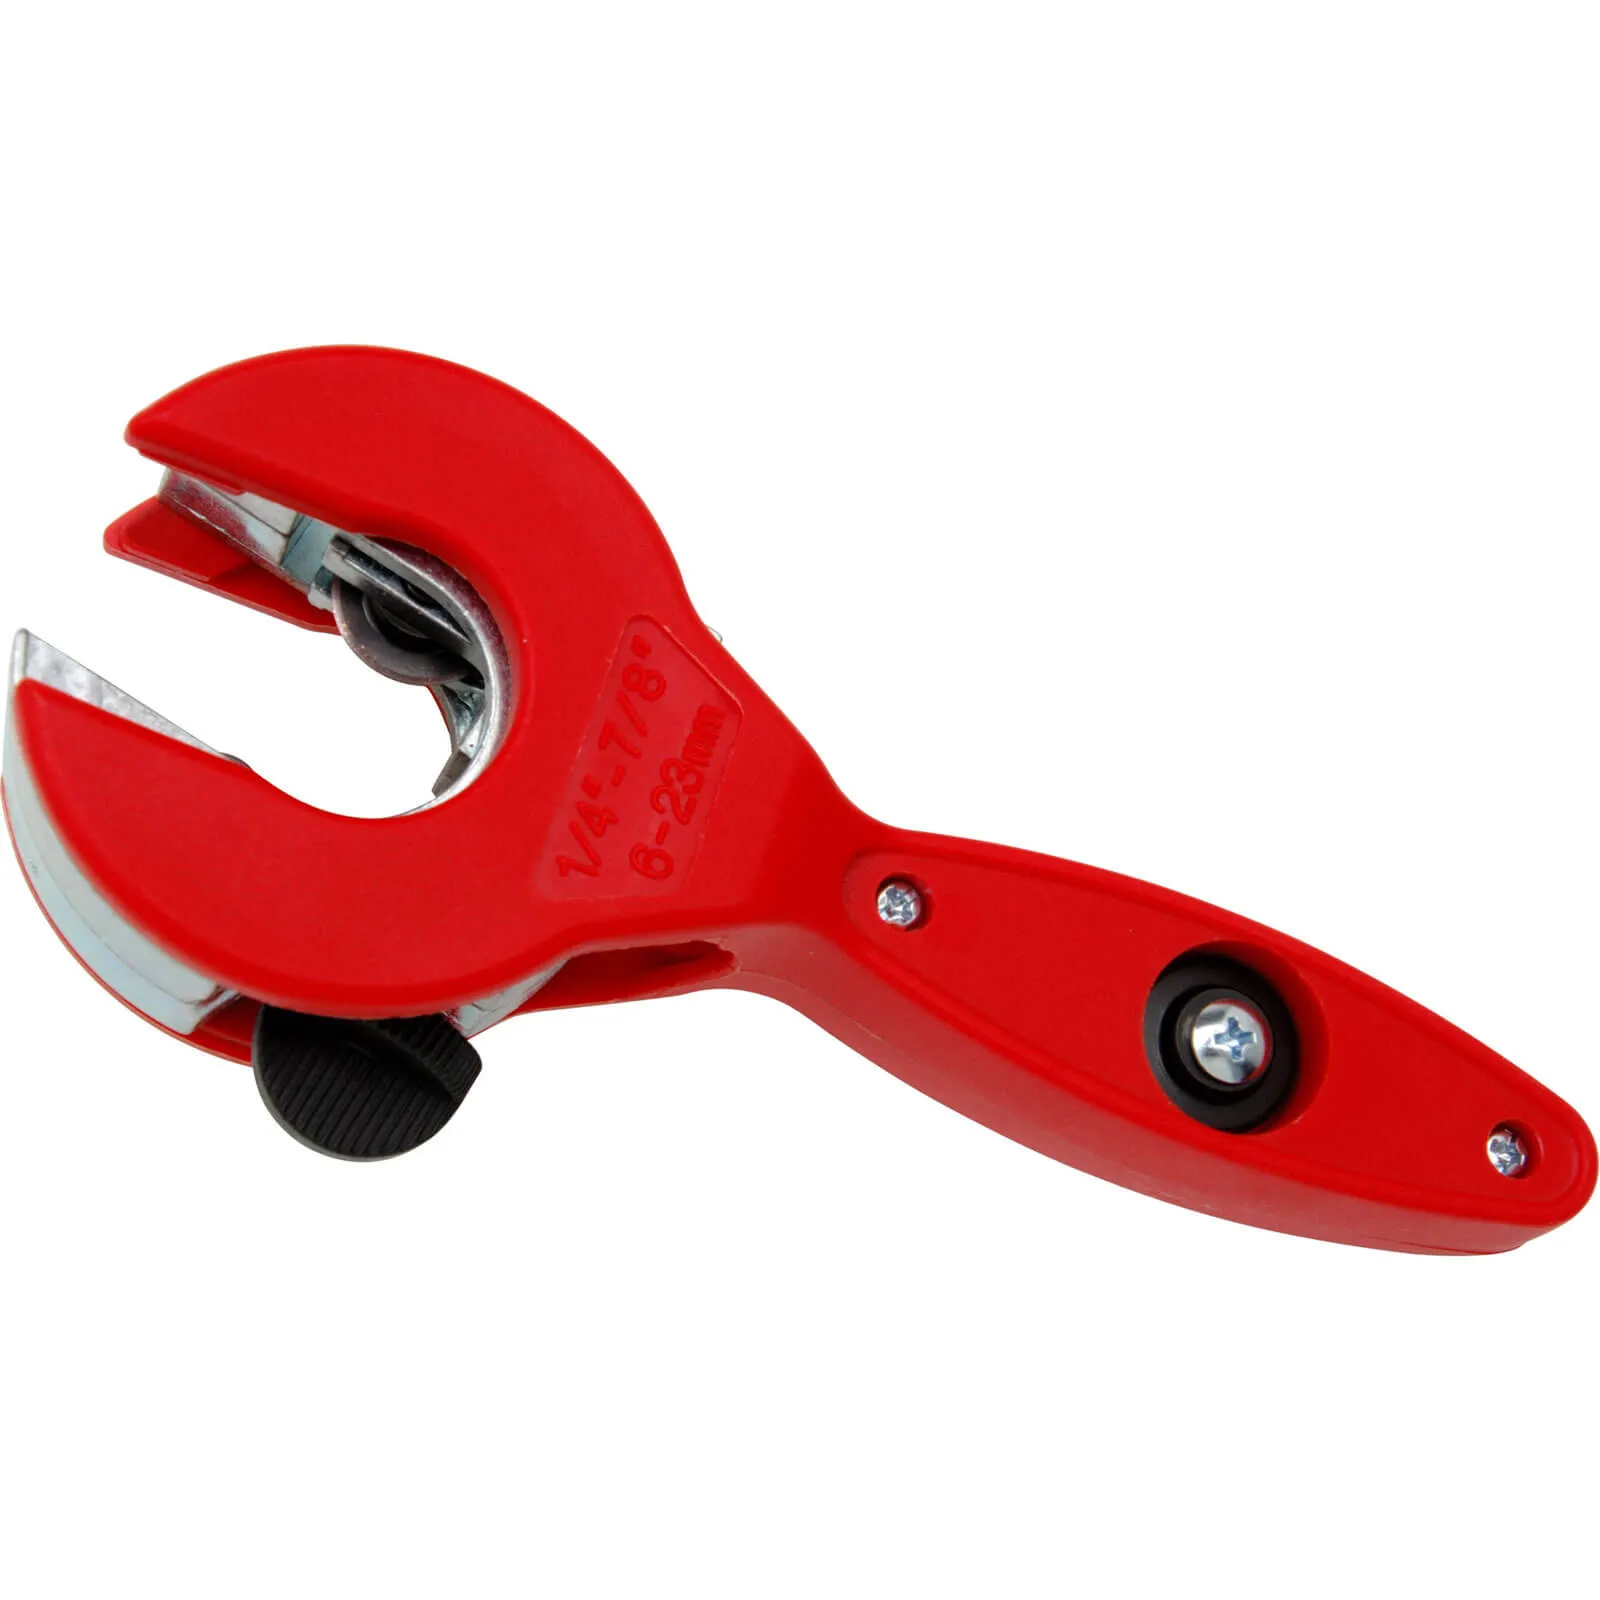 Wiss Ratchet Pipe Cutters - 6mm - 23mm